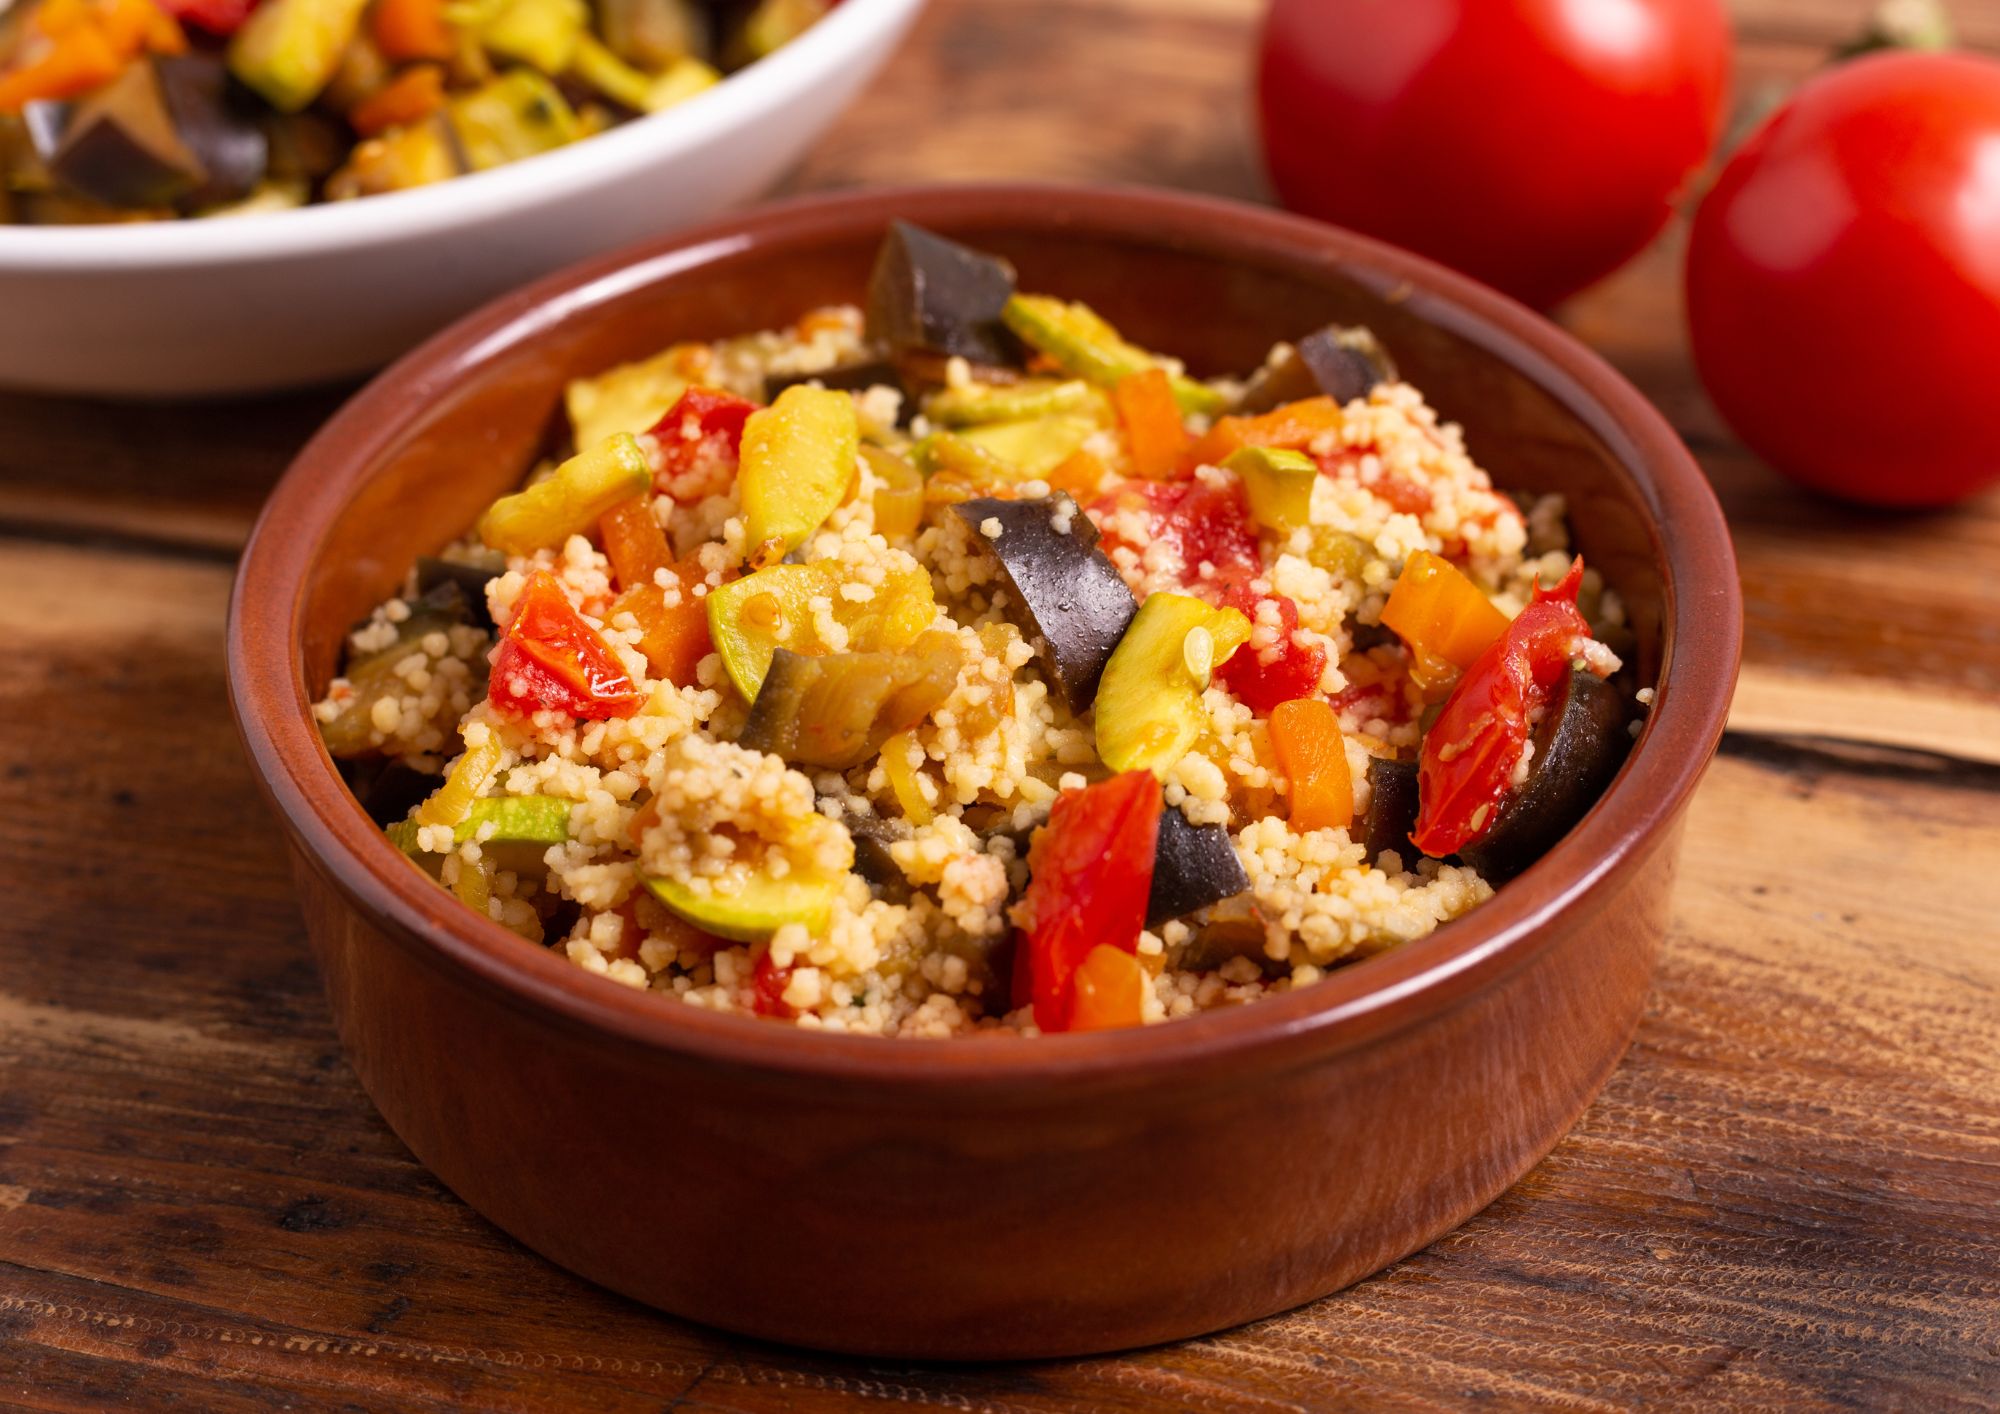 Cous cous with vegetables 